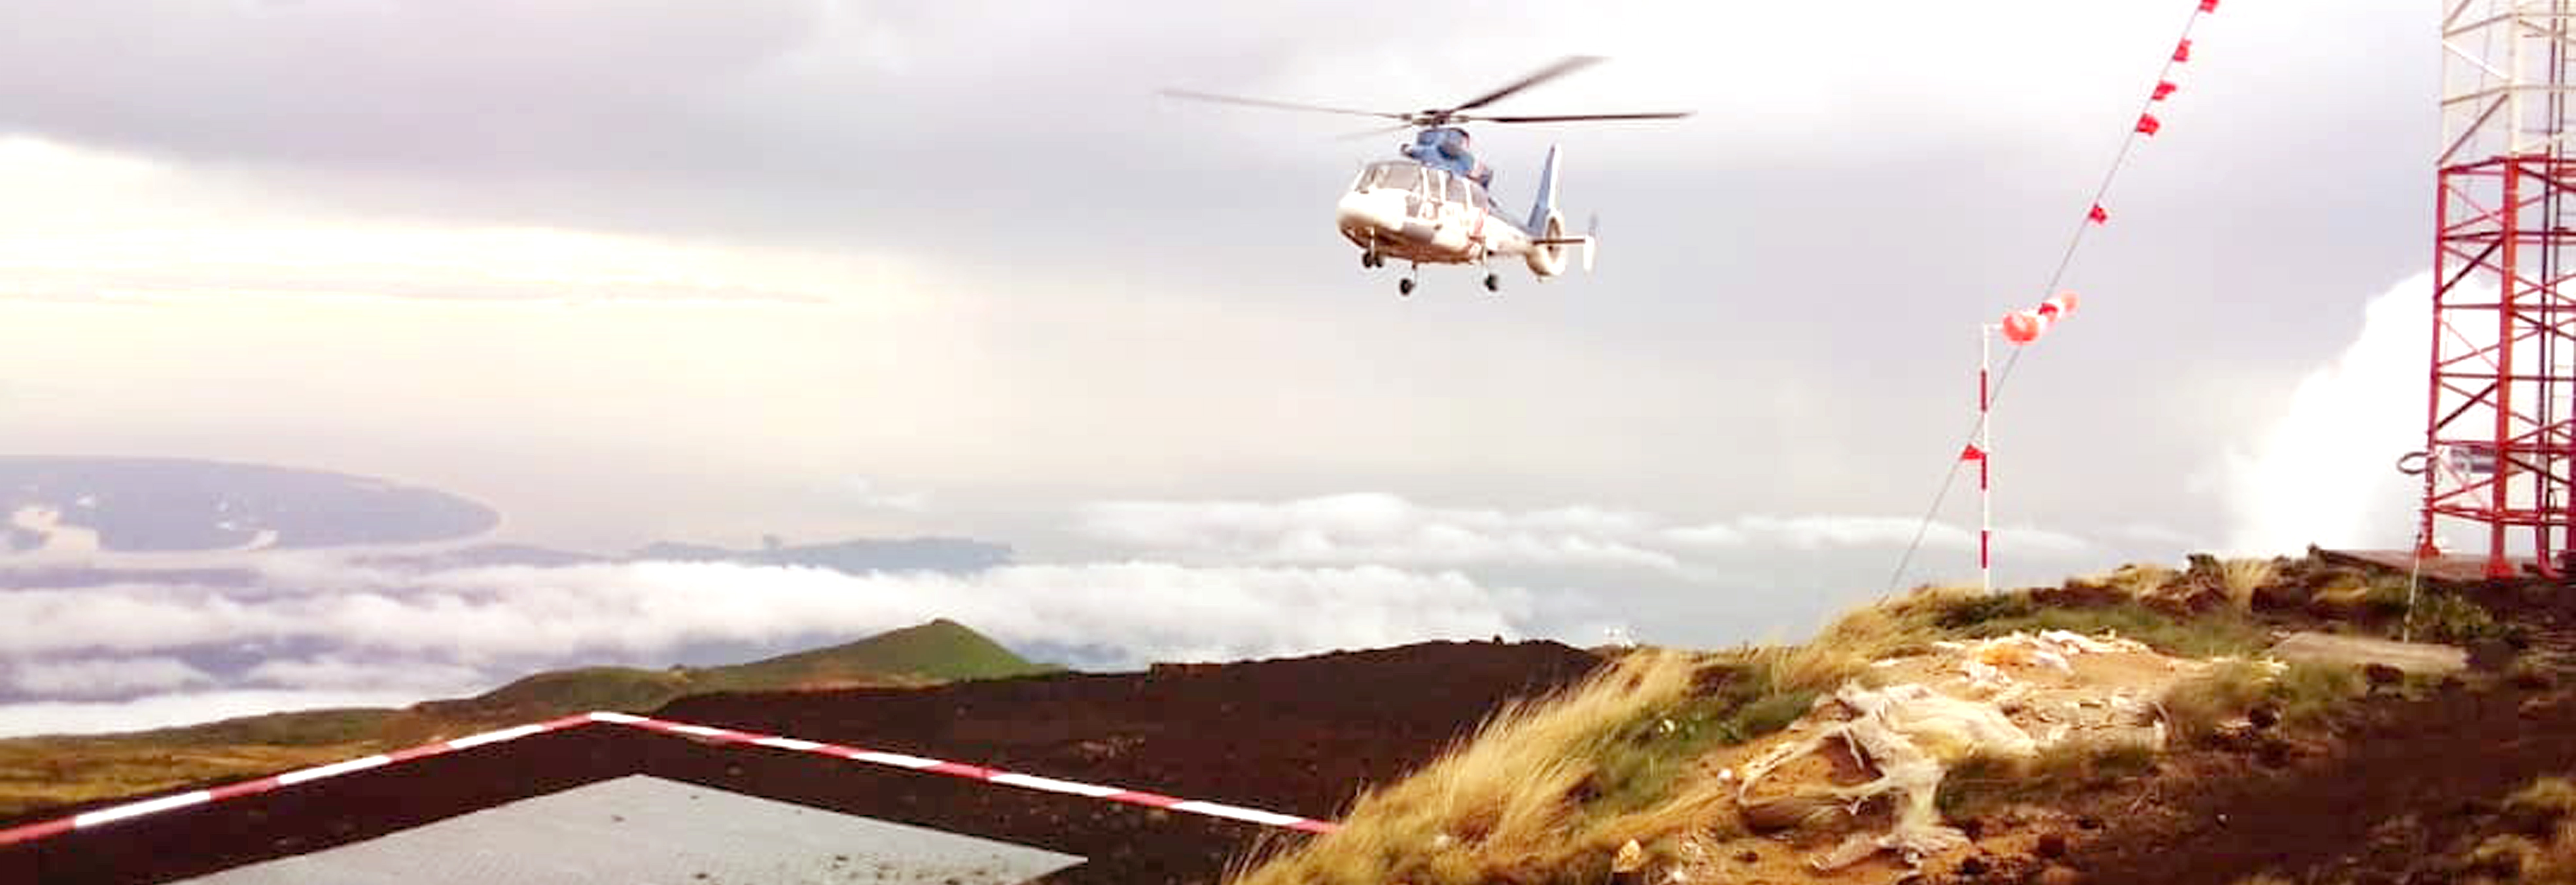 Addax Petroleum Gives Mount Cameroun Its First Heliport.